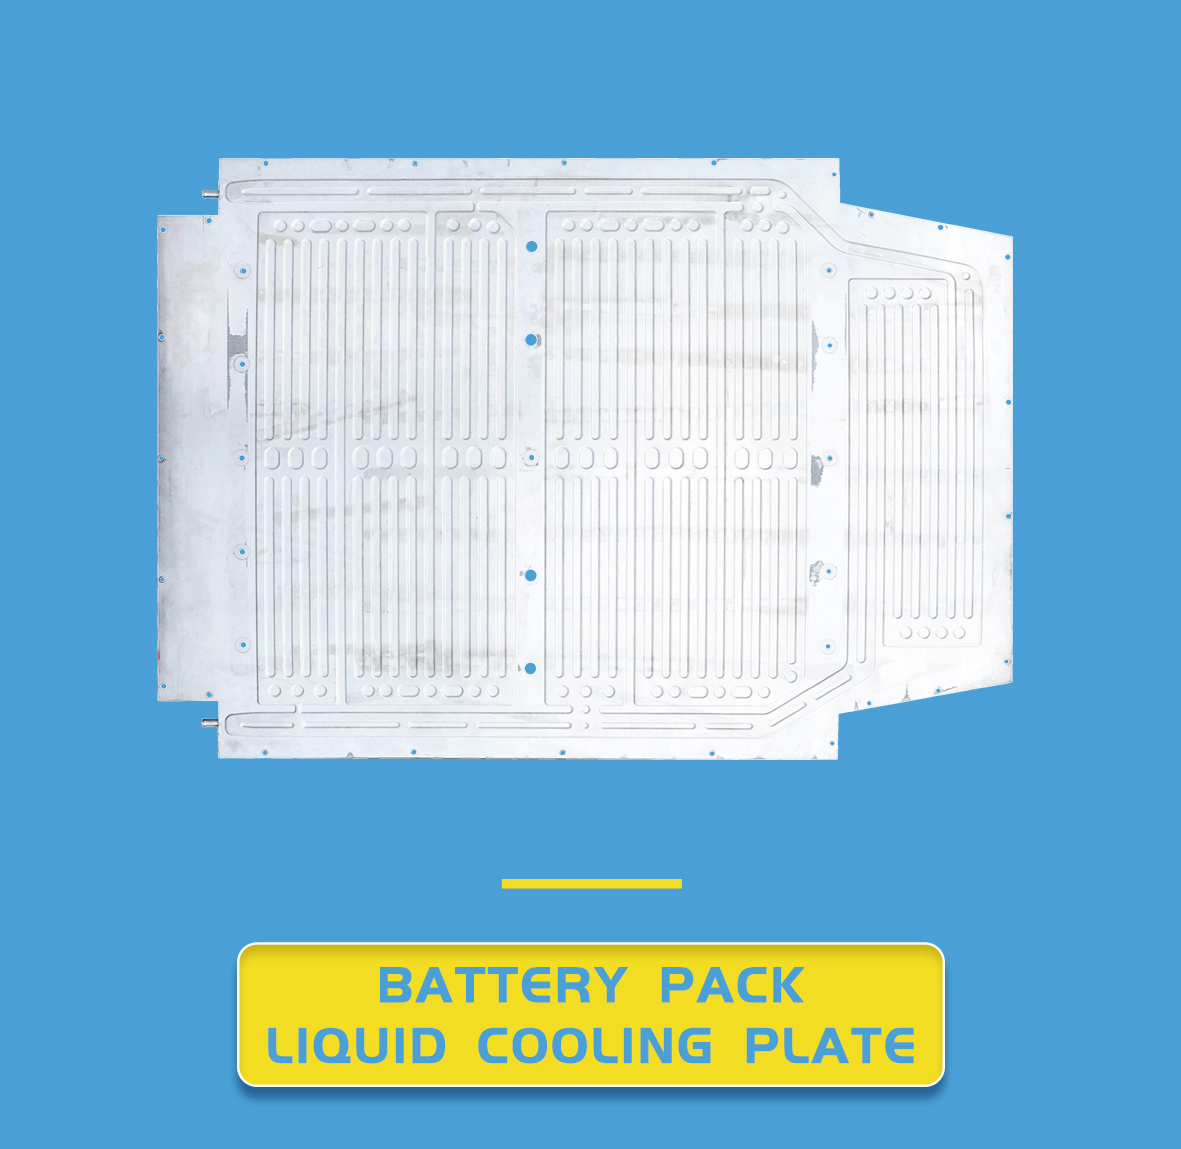 BATTERY PACKIQUID COOLING PLATE 3